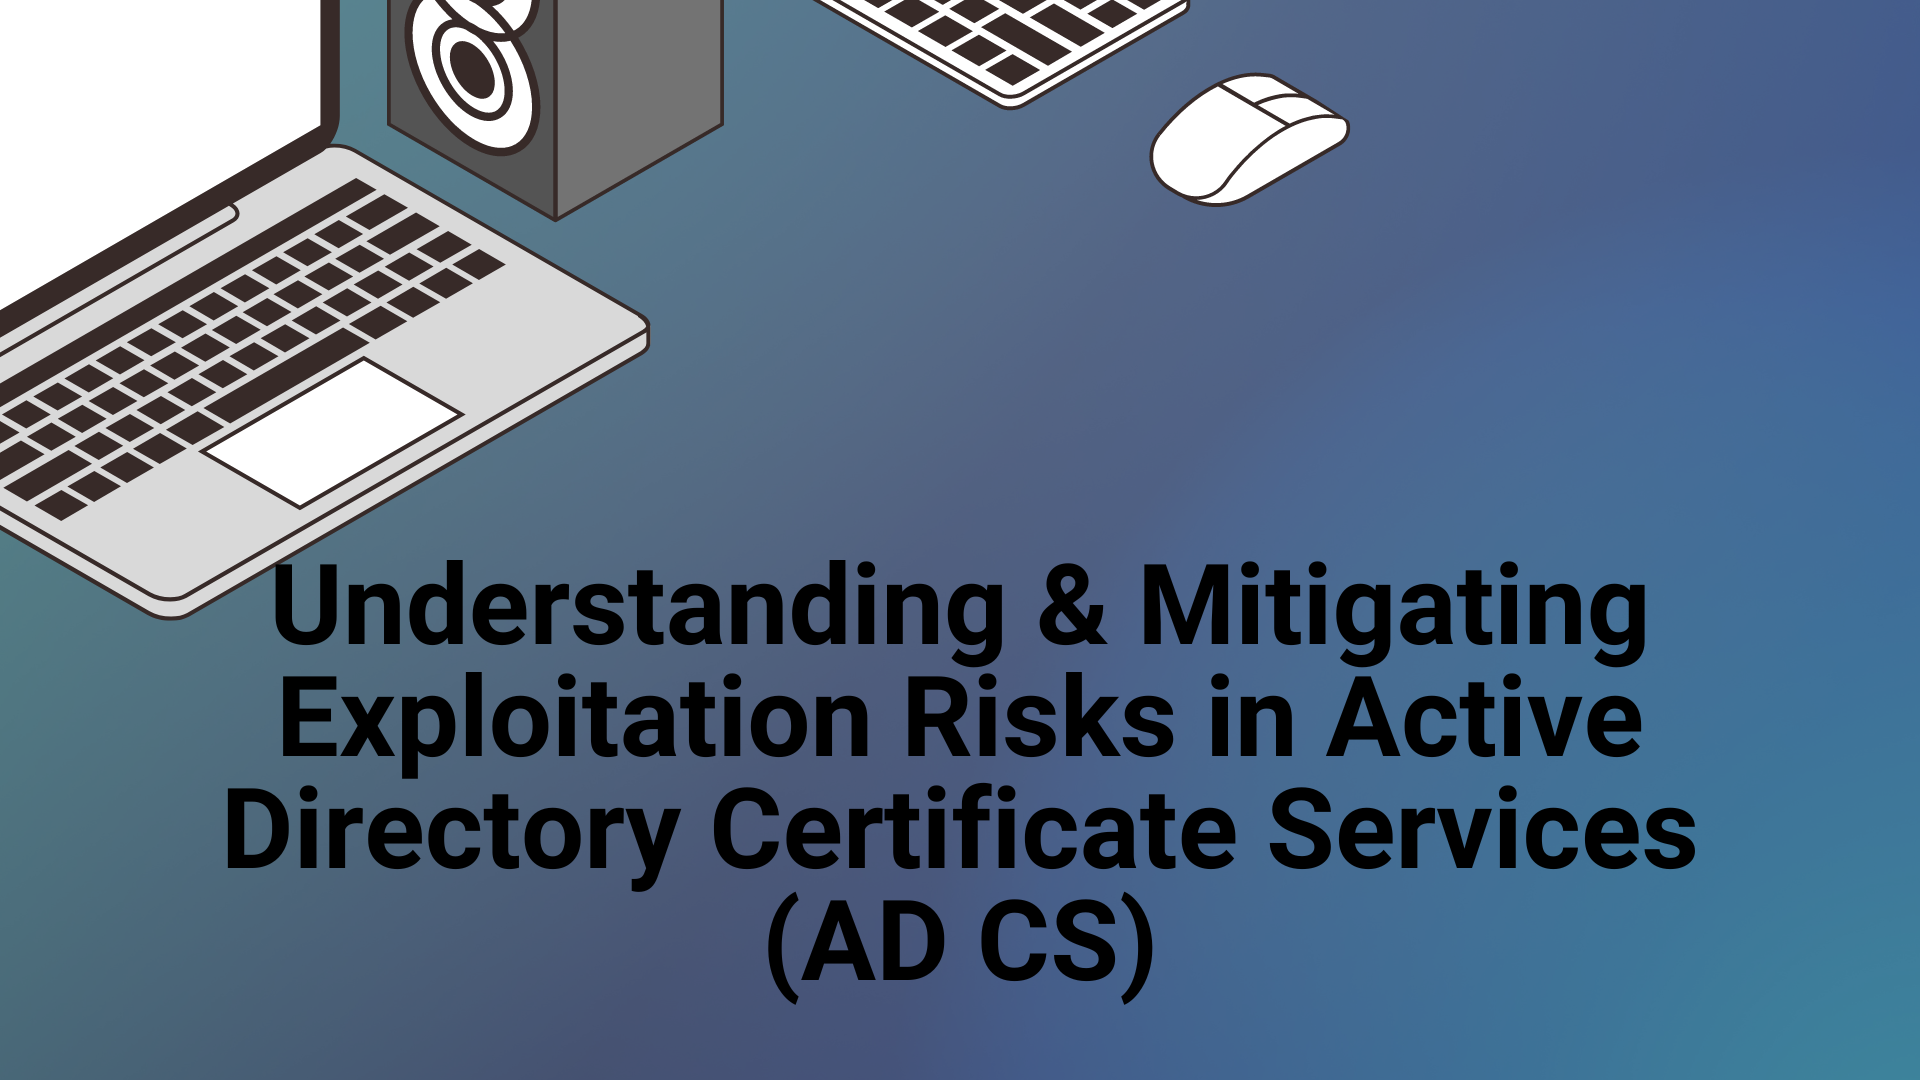 Mitigating Exploitation Risks in Active Directory Certificate Services